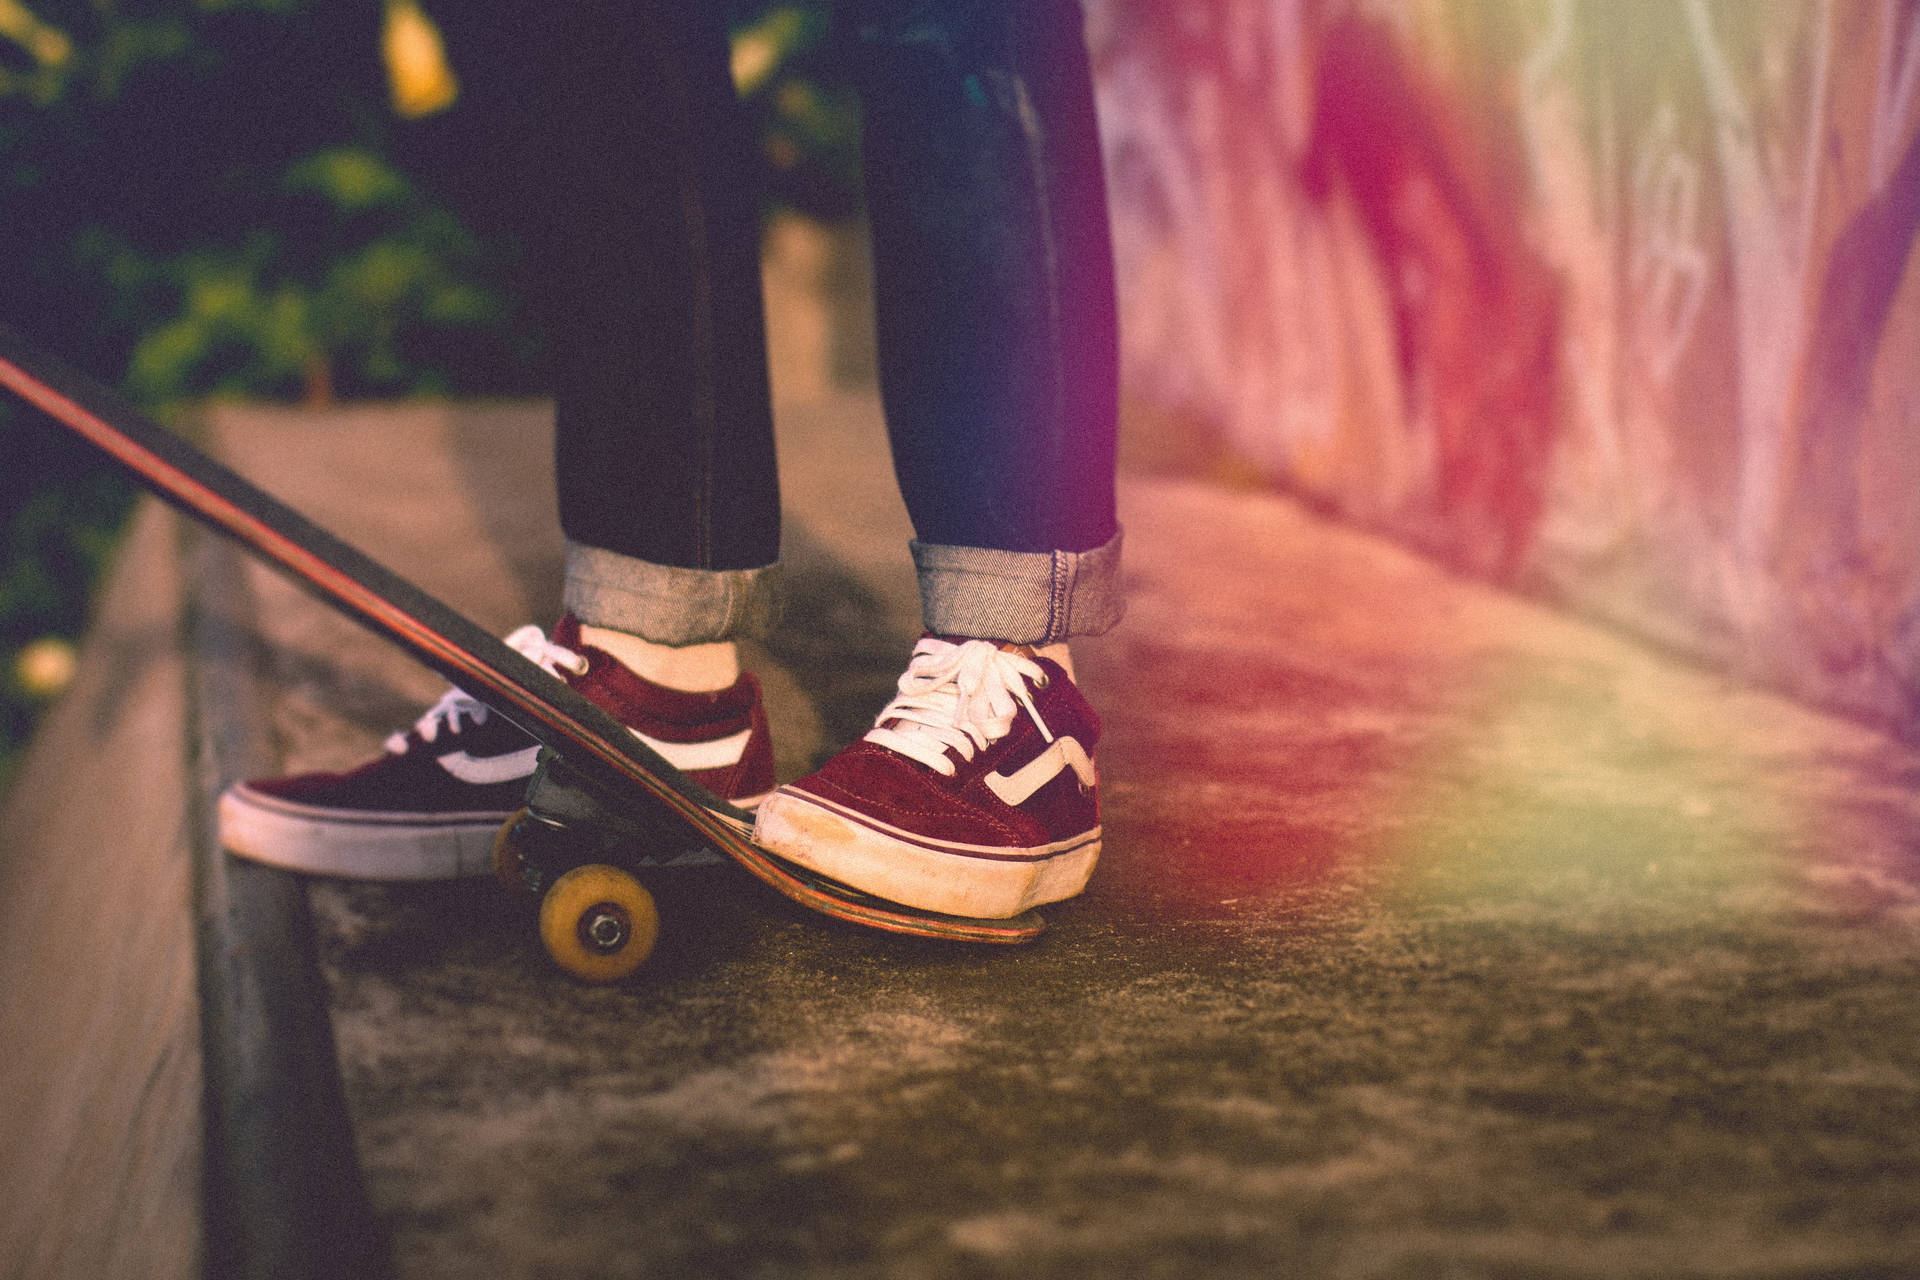 Taking the skateboarding style to the next level with Red Vans Wallpaper